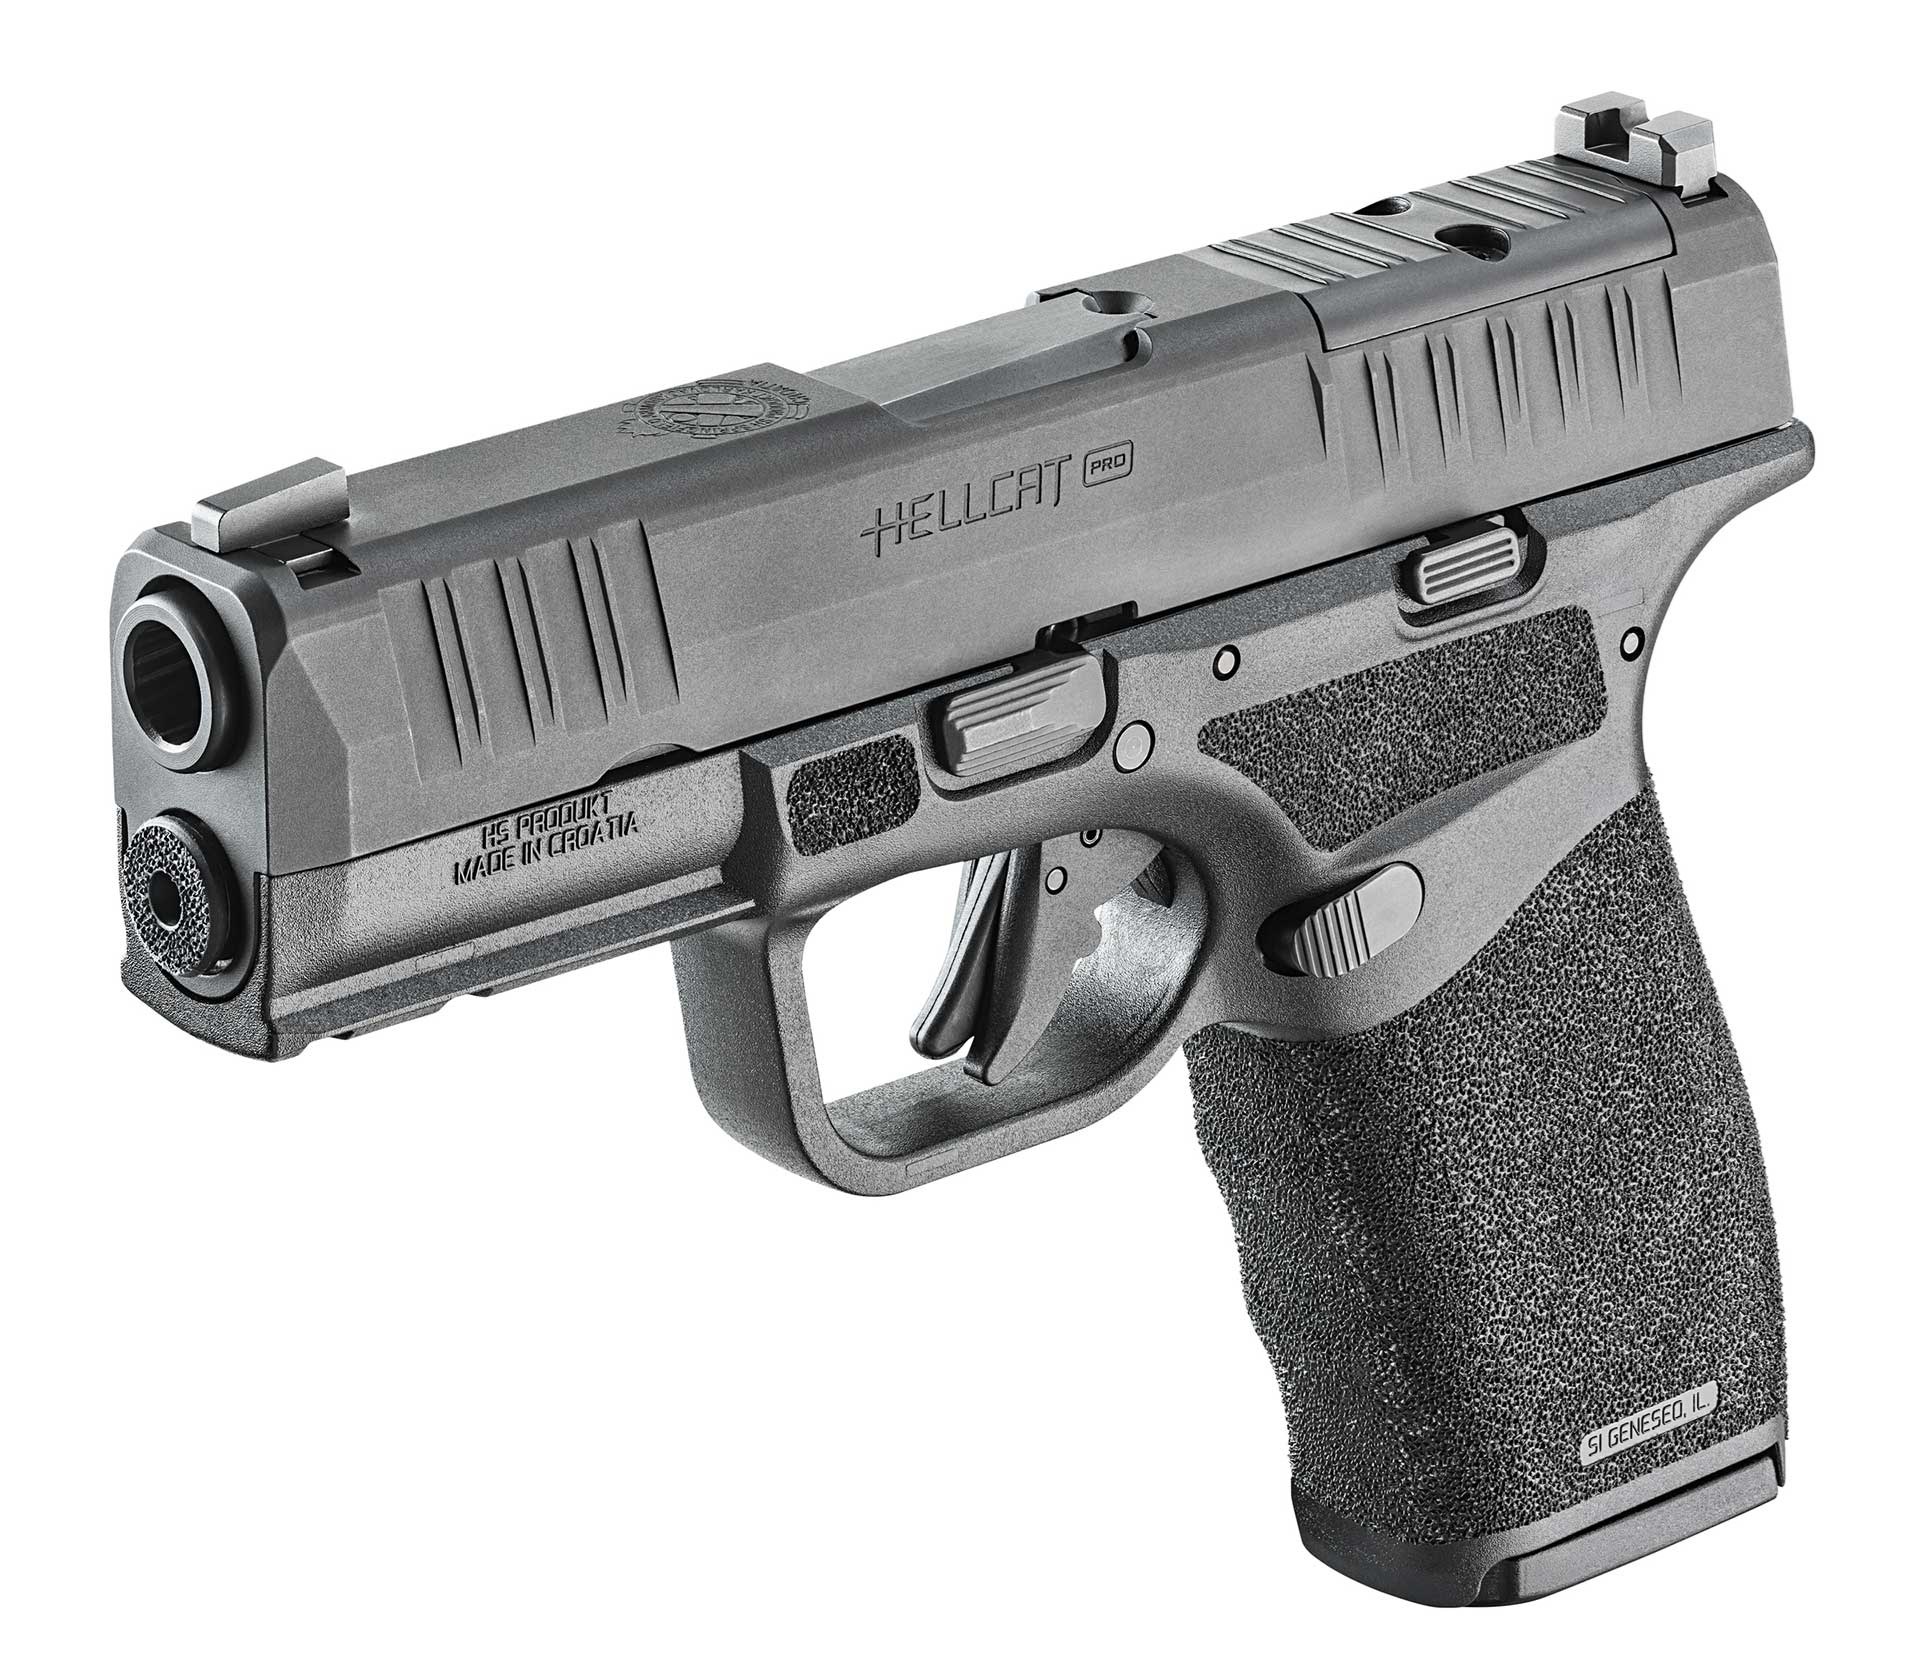 Springfield Armory Hellcat Pro, angled toward the camera, showing the gun's left-side controls.